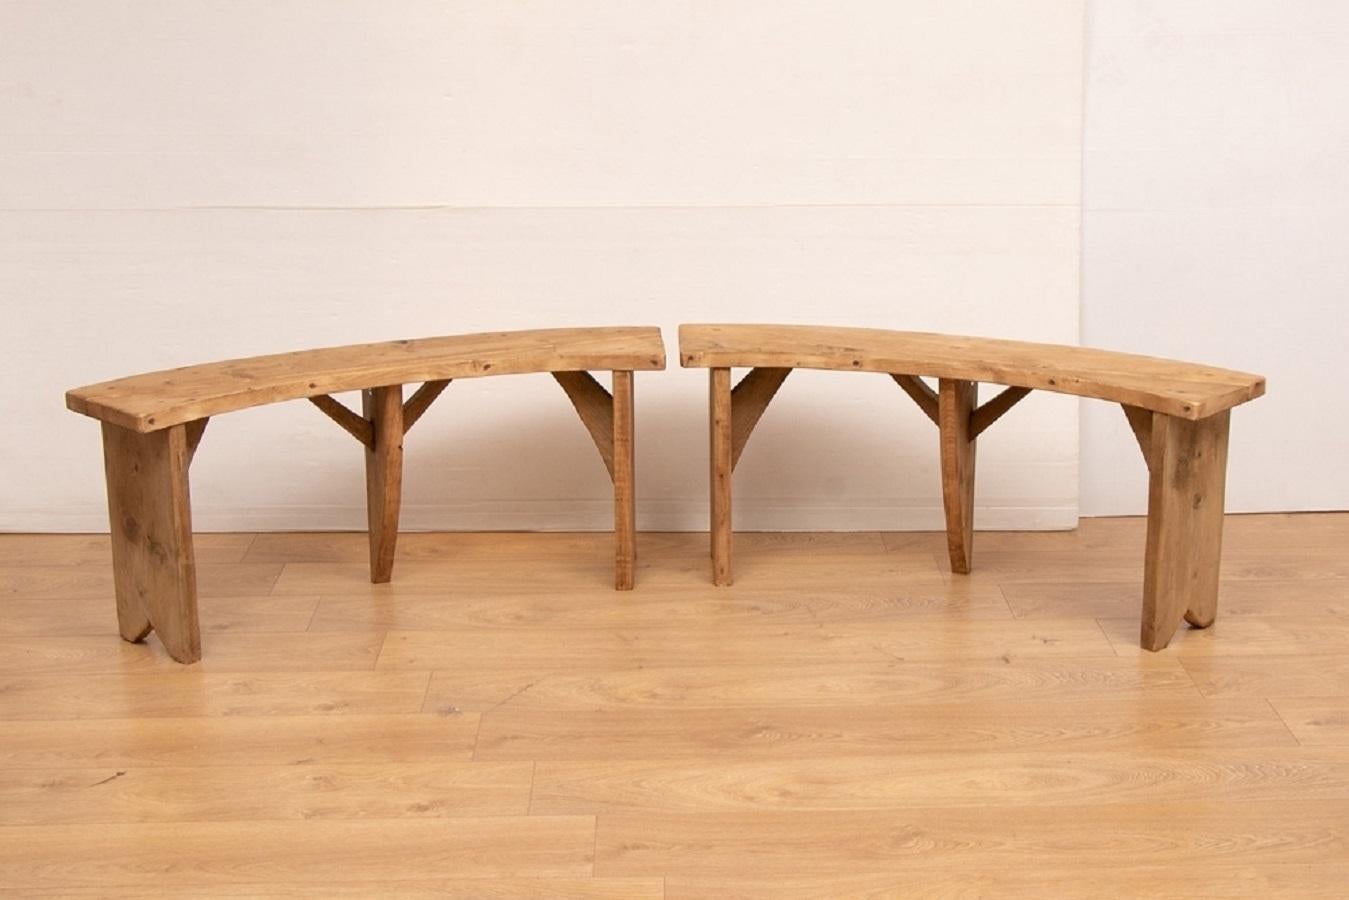 A set of six circular benches made in old reclaimed pine.

Measures: H: 50cm, W: 247cm - 118cm, D: 29cm.
 